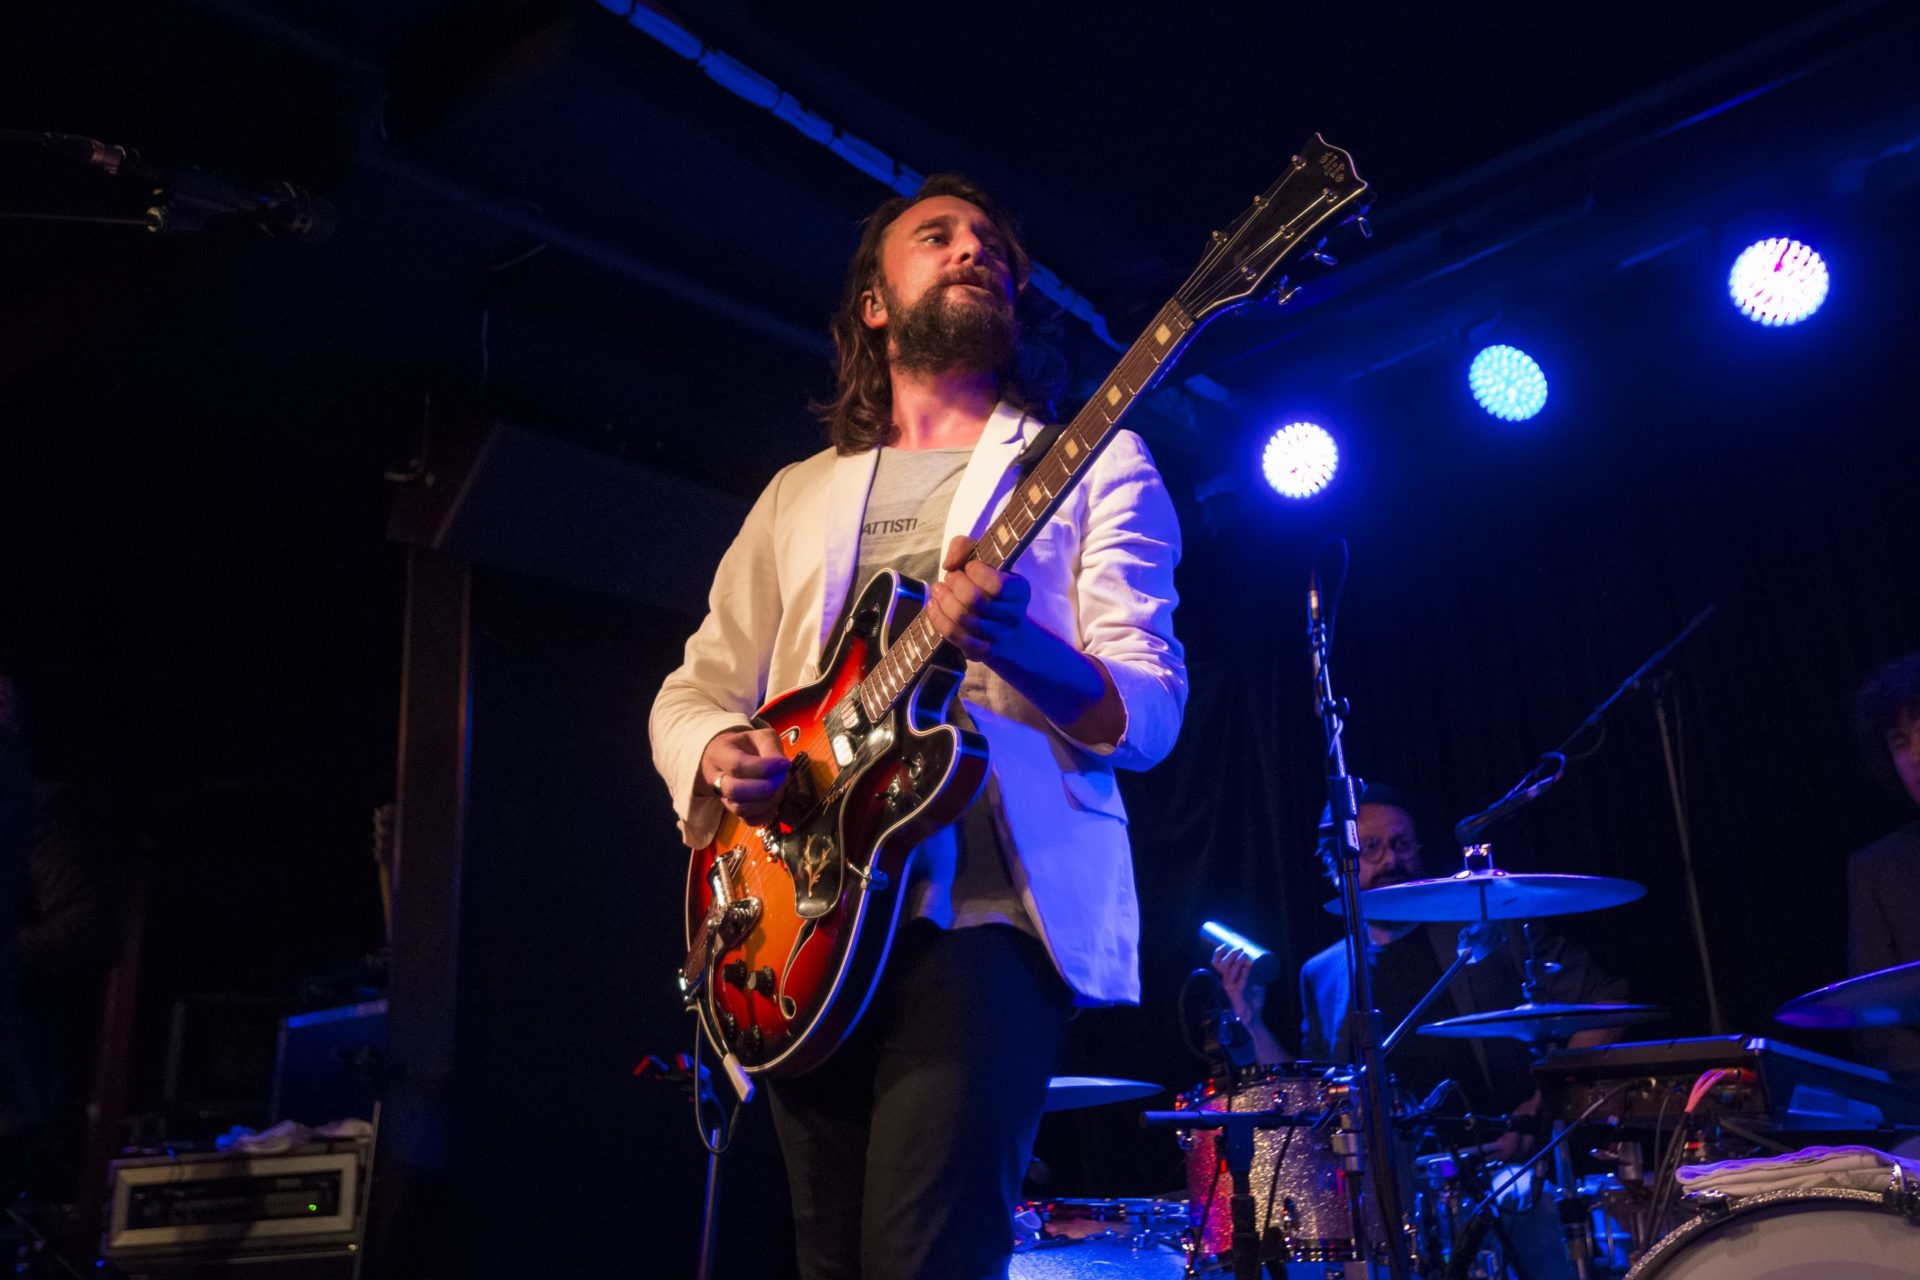 Nic Cester And The Milano Elettrica @ The Basement, April ’17